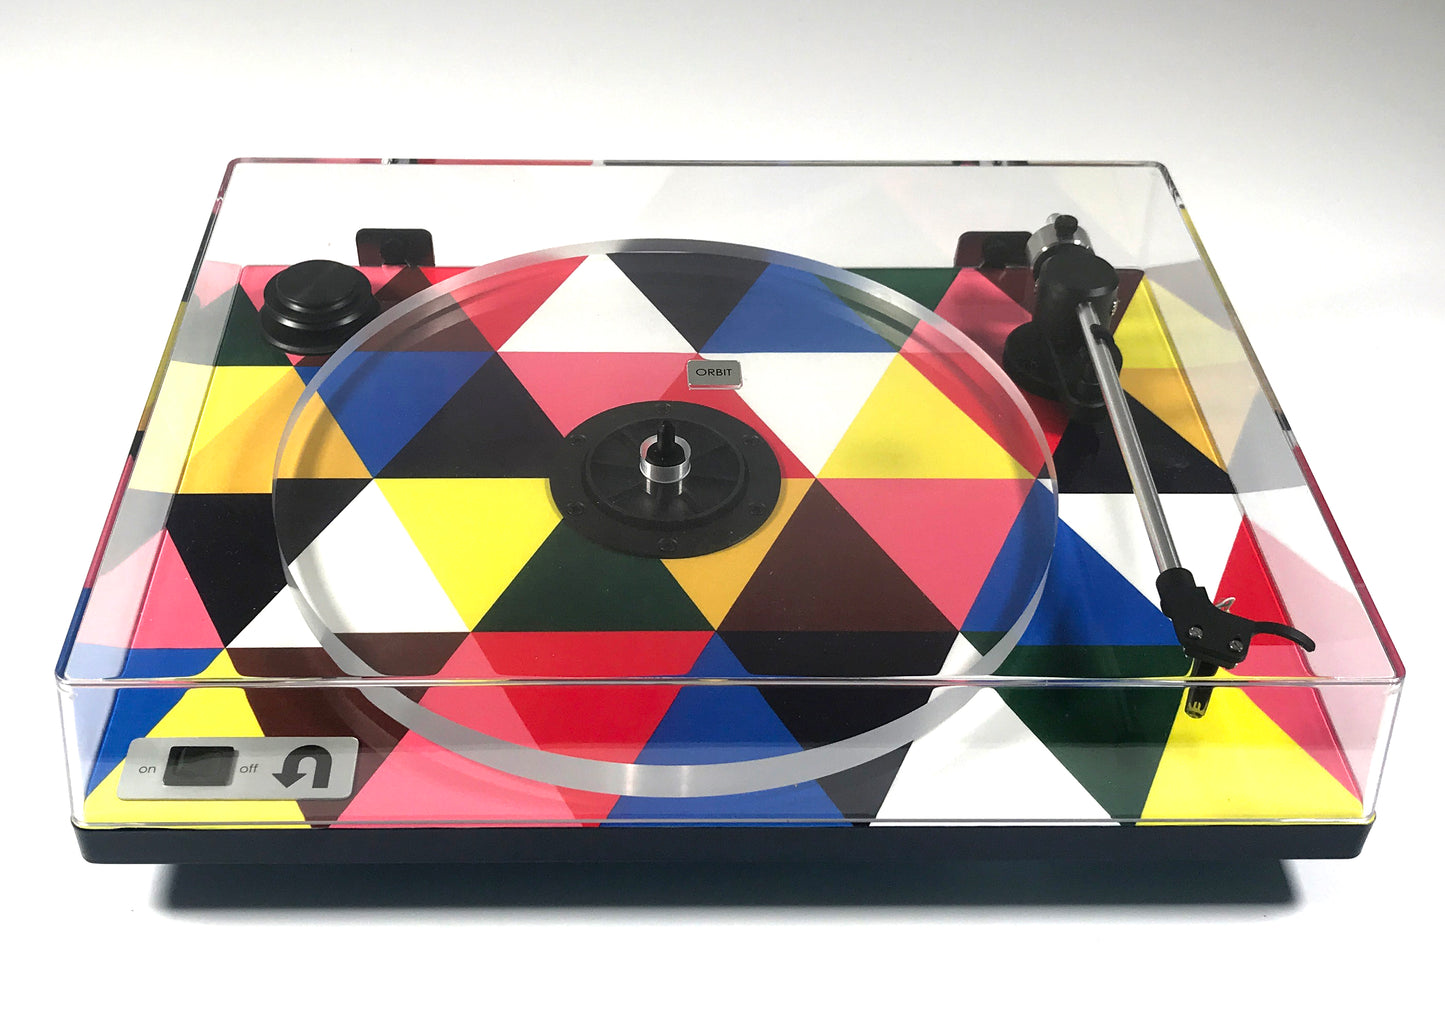 Limited Edition "Eames Inspired" U-Turn Turntable